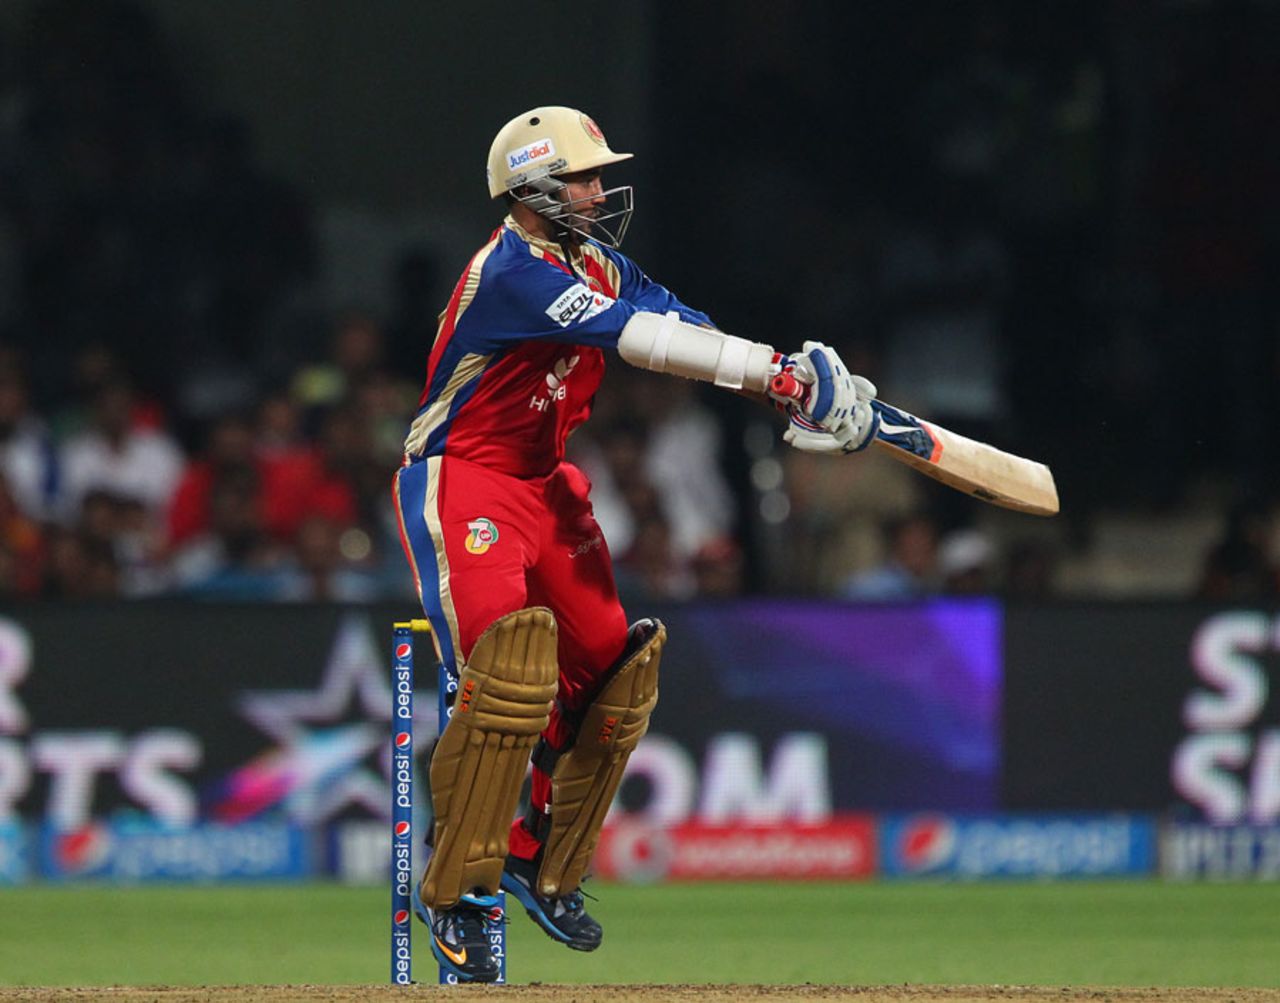 Parthiv Patel guides the ball down the off side, Royal Challengers Bangalore v Delhi Daredevils, IPL 2014, Bangalore, May 13, 2014